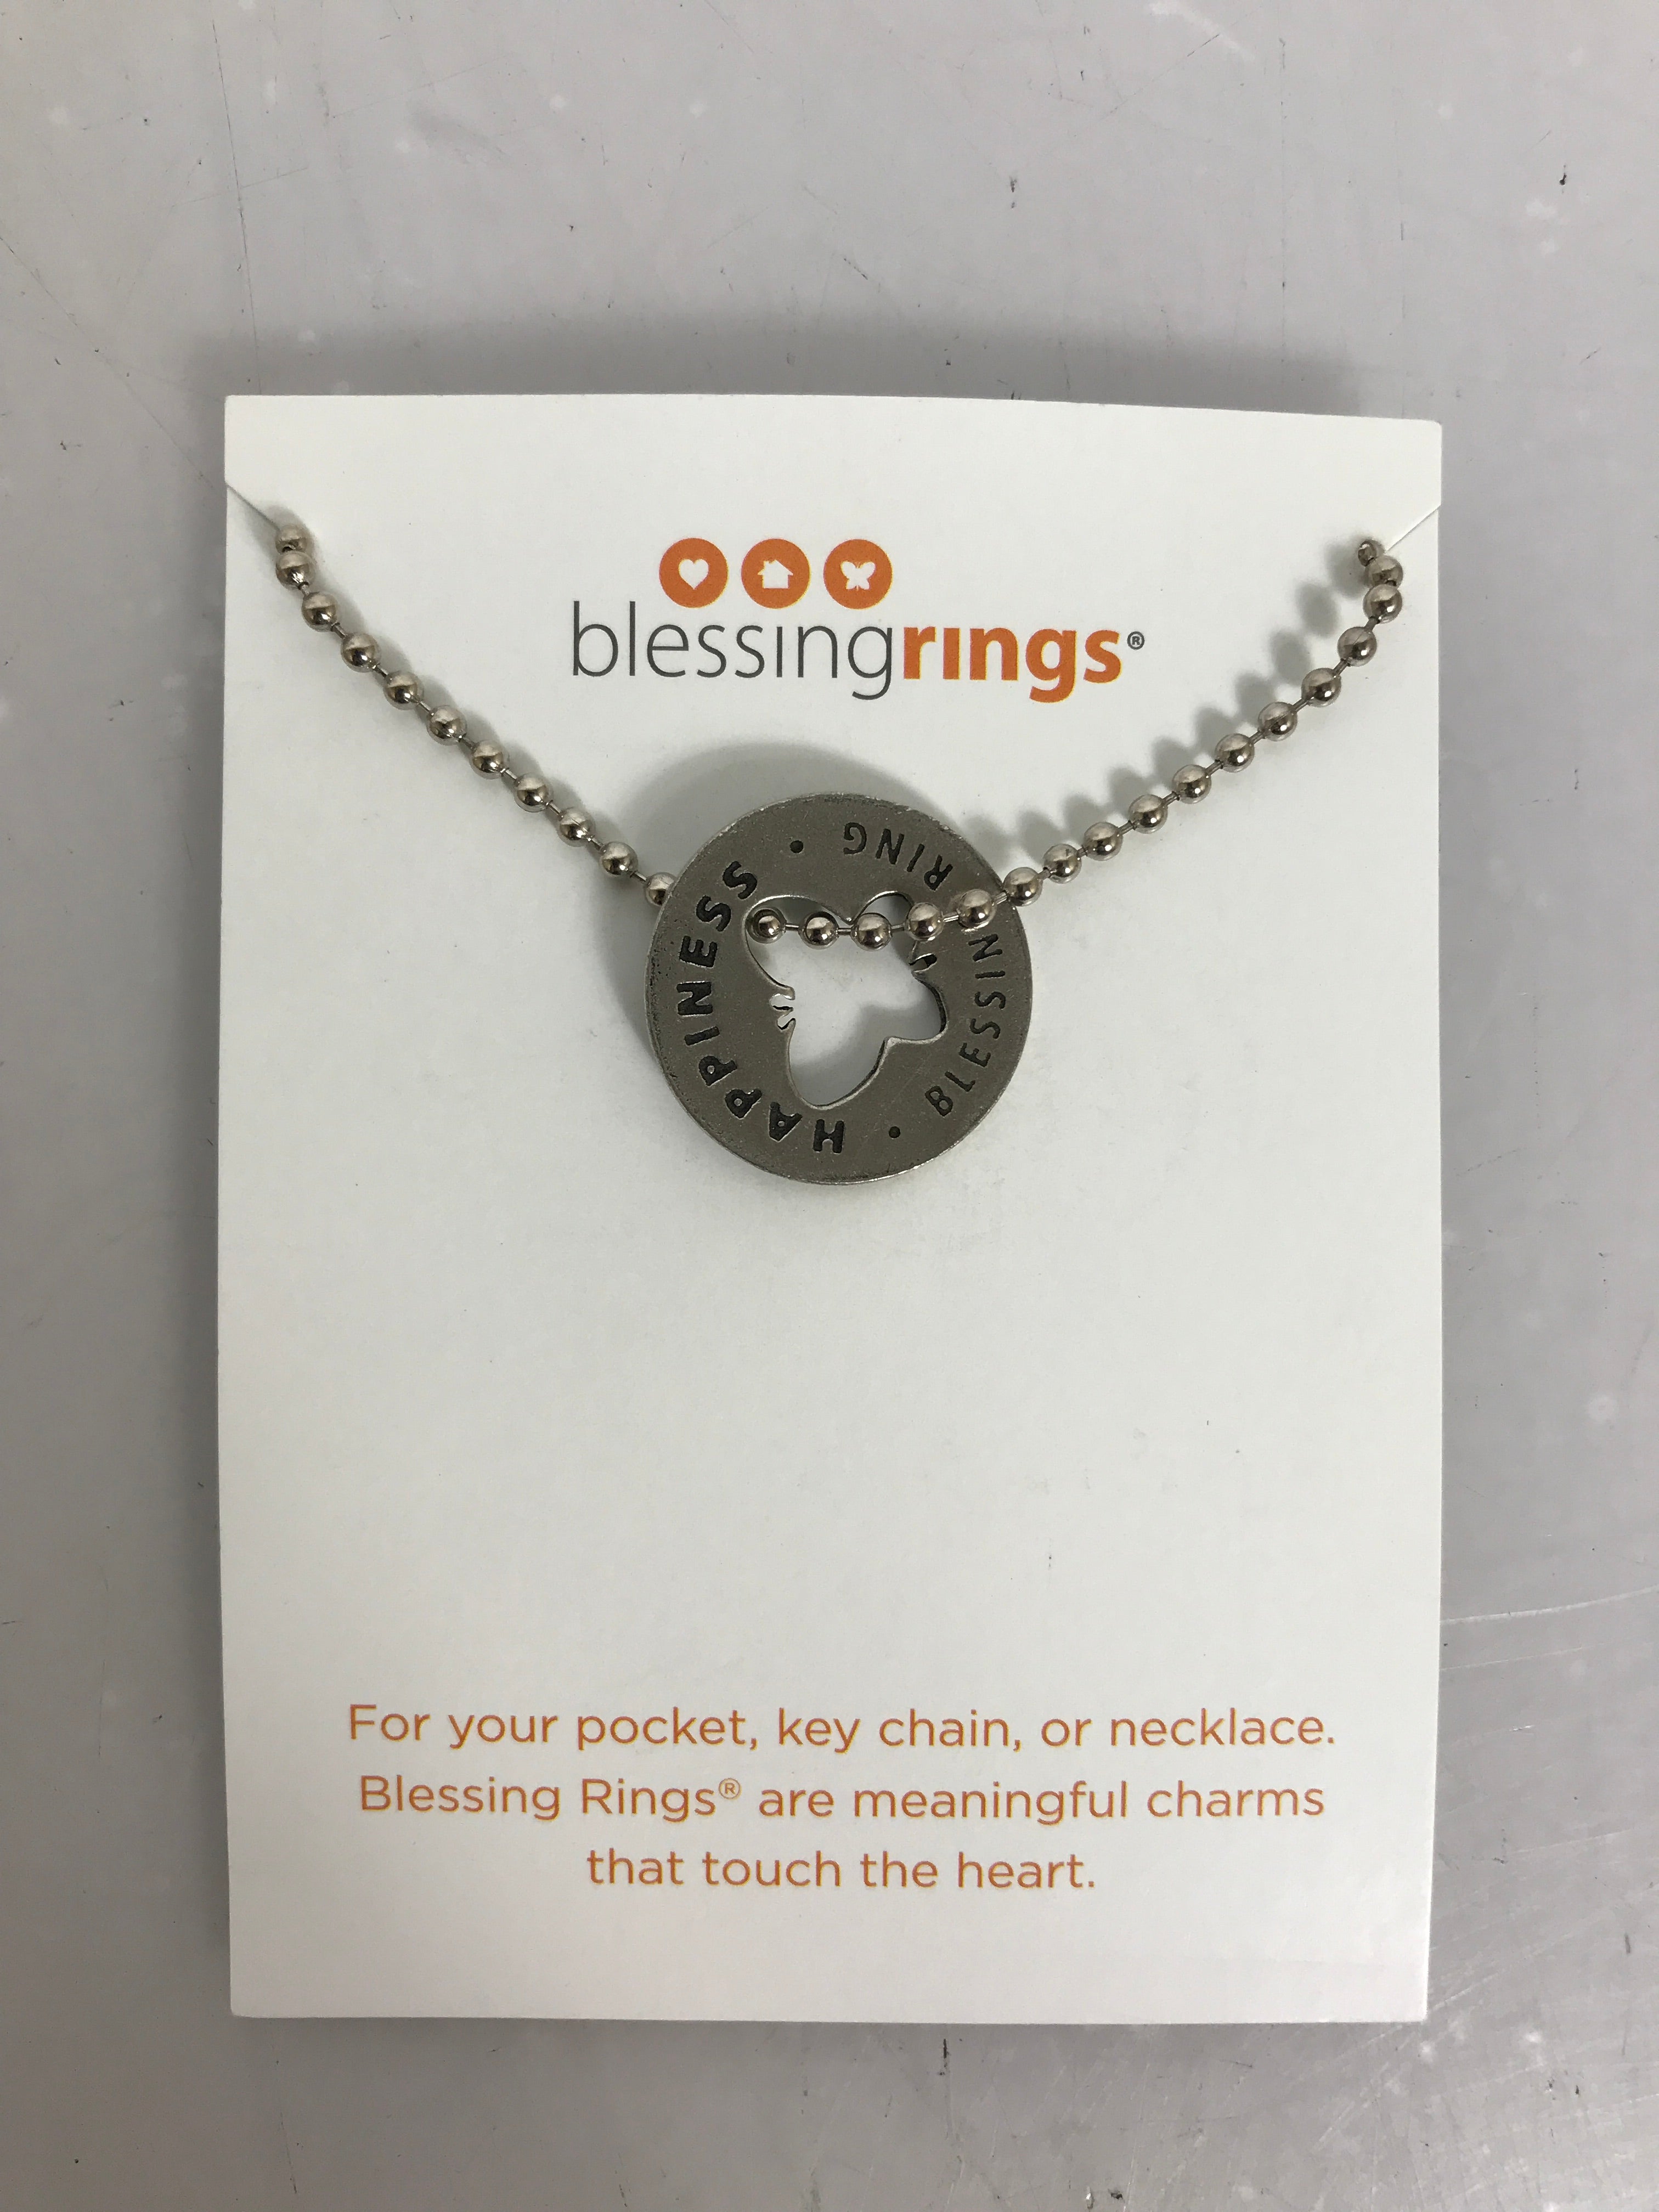 WHD BlessingRings "Happiness" Necklace